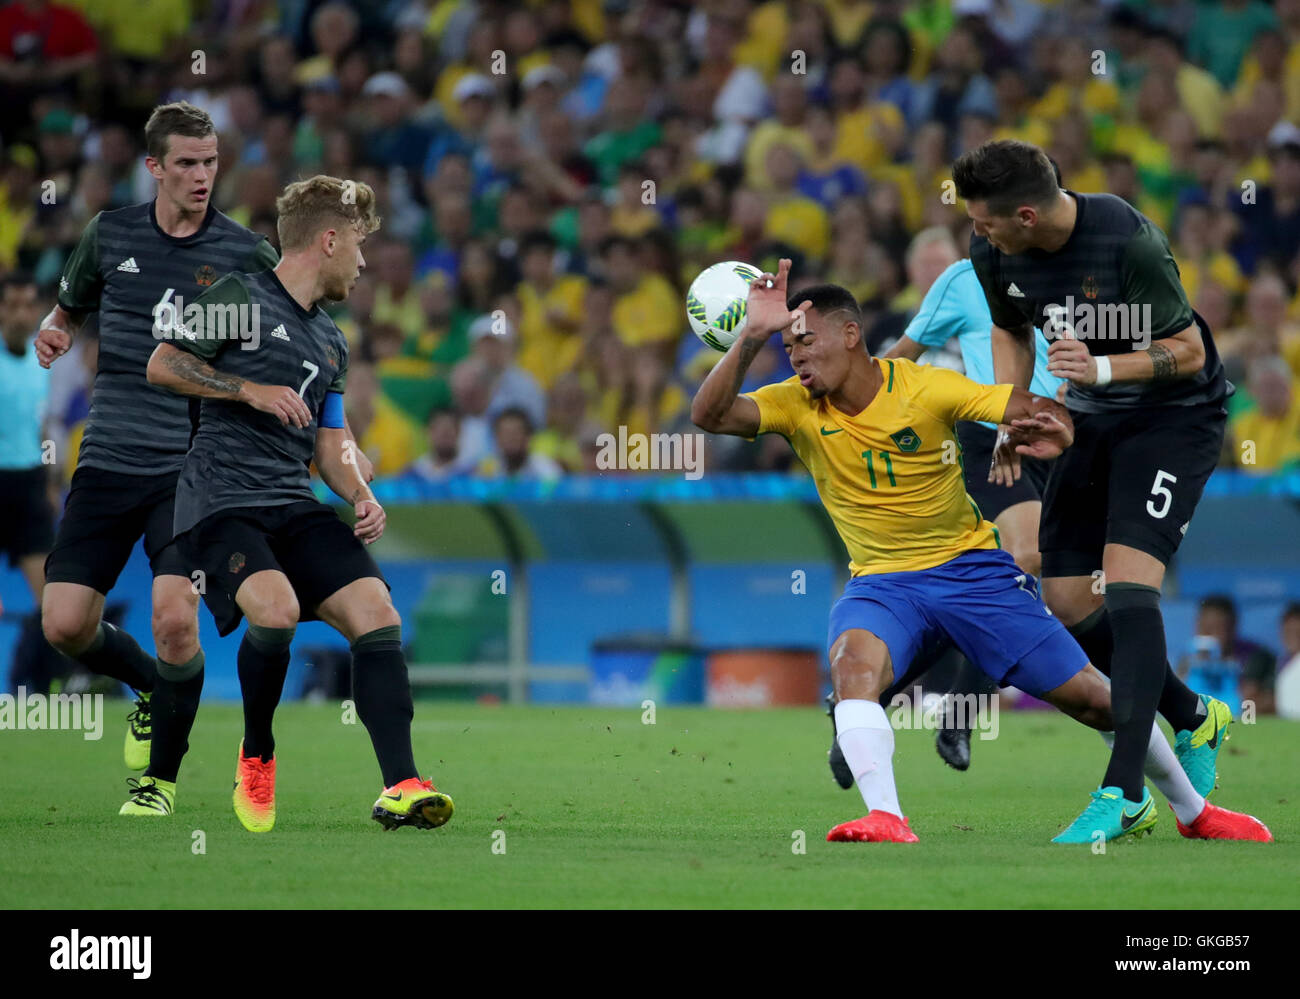 Rio de Janeiro, Brazil. 20th Aug, 2016. Niklas Suele (R), Sven Bender (L), Maximilian Meyer (2-L) of Germany and Gabriel Jesus (2-R) of Brazil vie for the ball during the Men's soccer Gold Medal Match between Brazil and Germany during the Rio 2016 Olympic Games at the Maracana in Rio de Janeiro, Brazil, 20 August 2016. Photo: Friso Gentsch/dpa/Alamy Live News Stock Photo